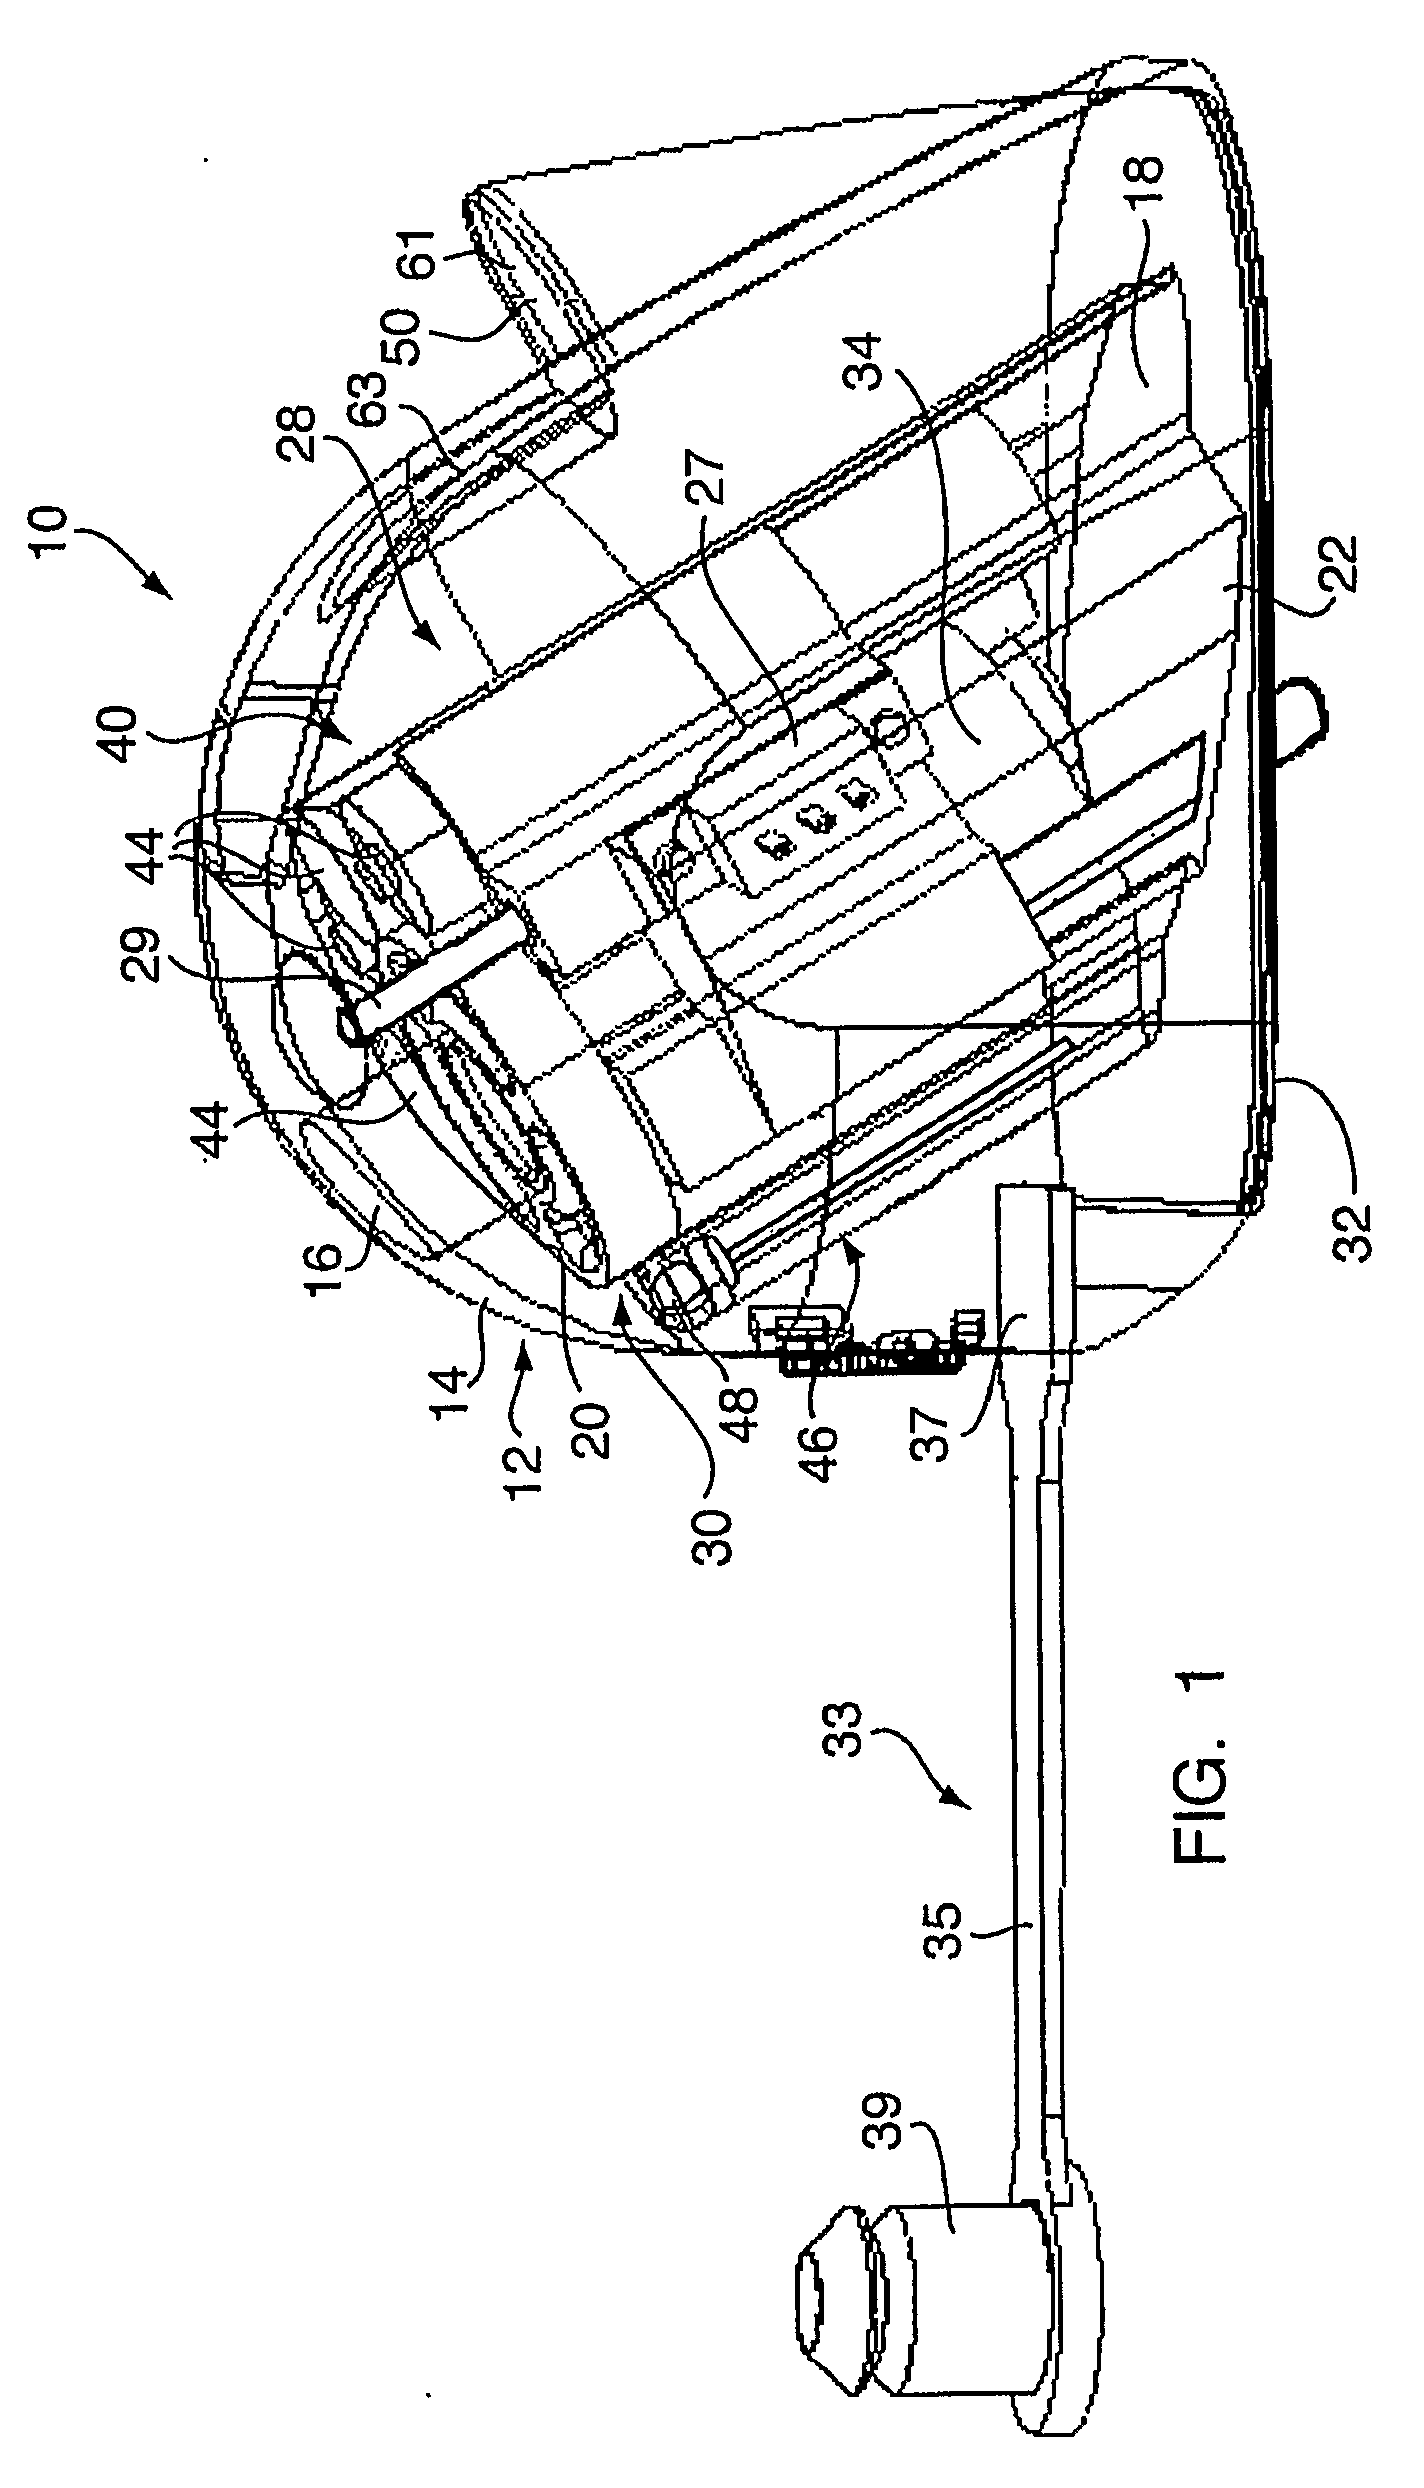 Device For White Balancing And Appying An Anti-Fog Agent To Medical Videoscopes Prior To Medical Procedures